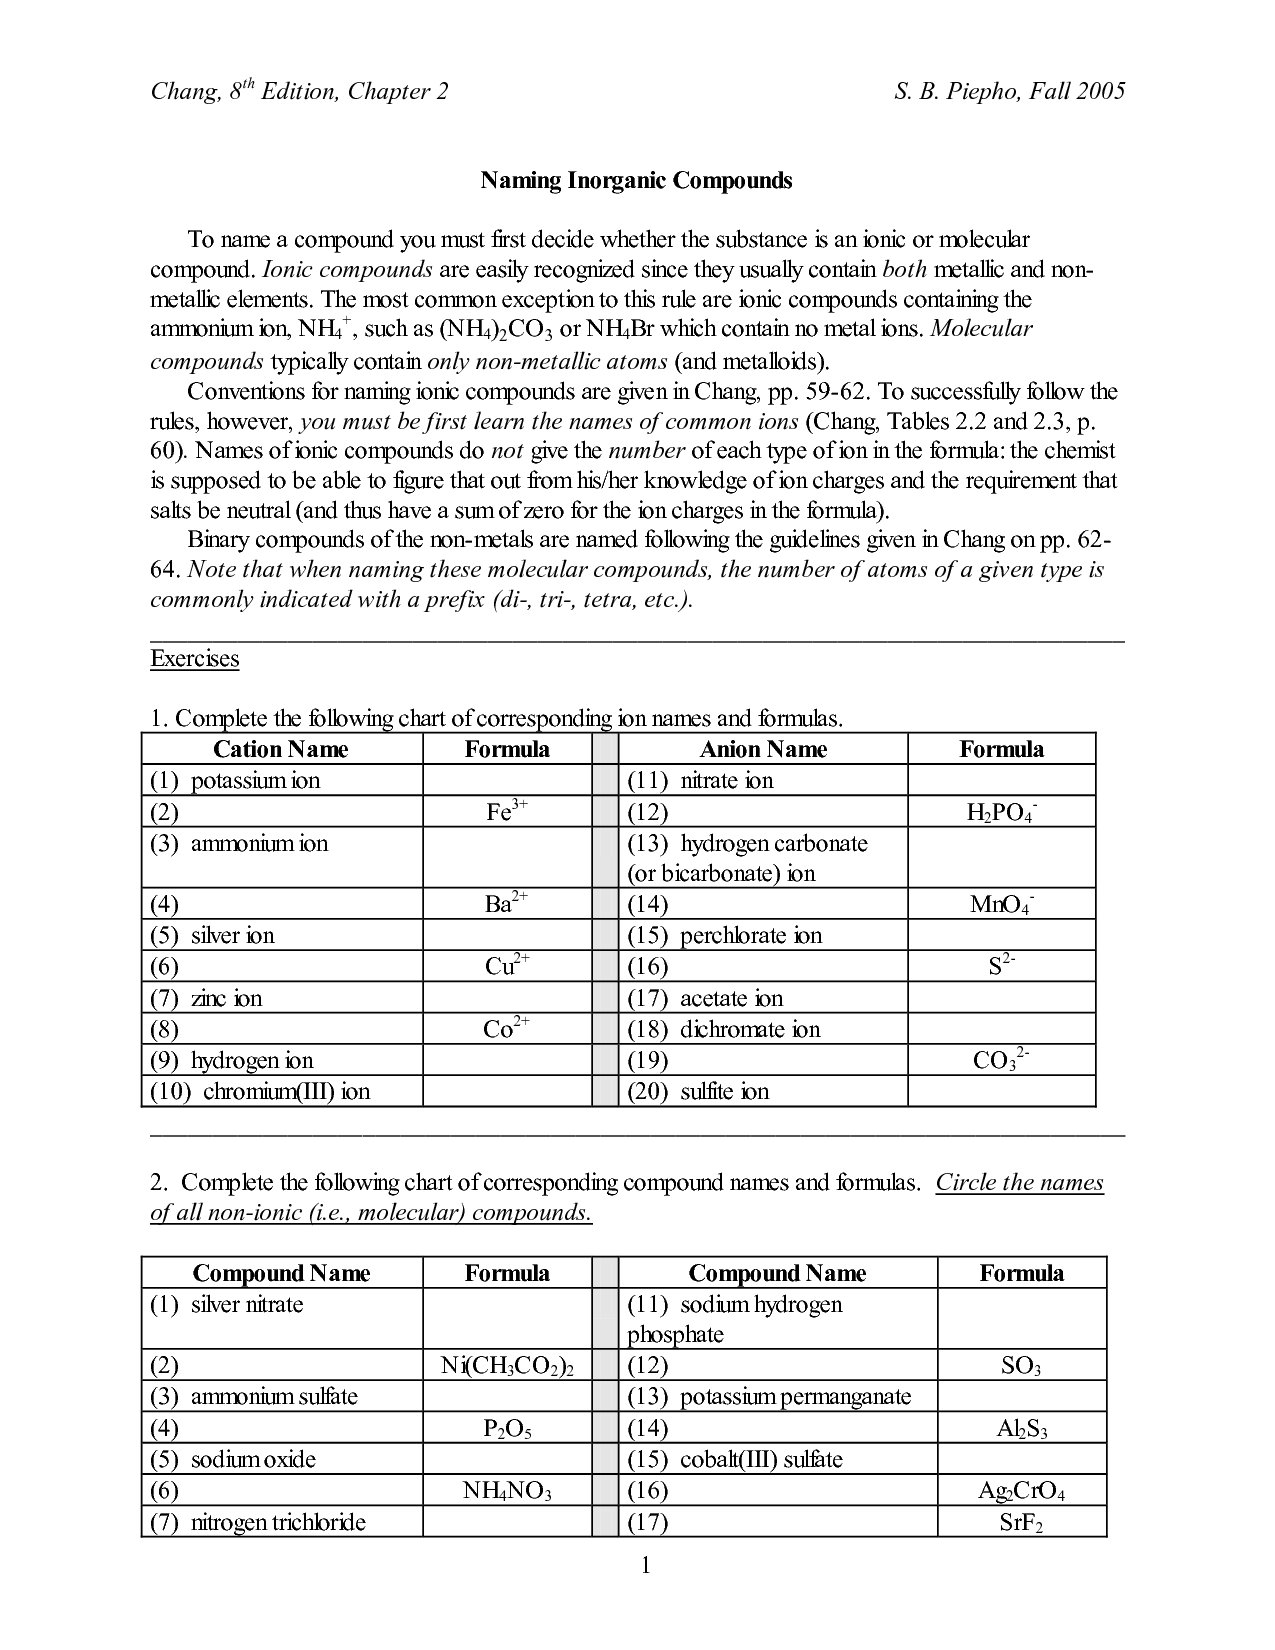 10-best-images-of-ionic-and-covalent-compounds-worksheet-naming-ionic-compounds-worksheet-one